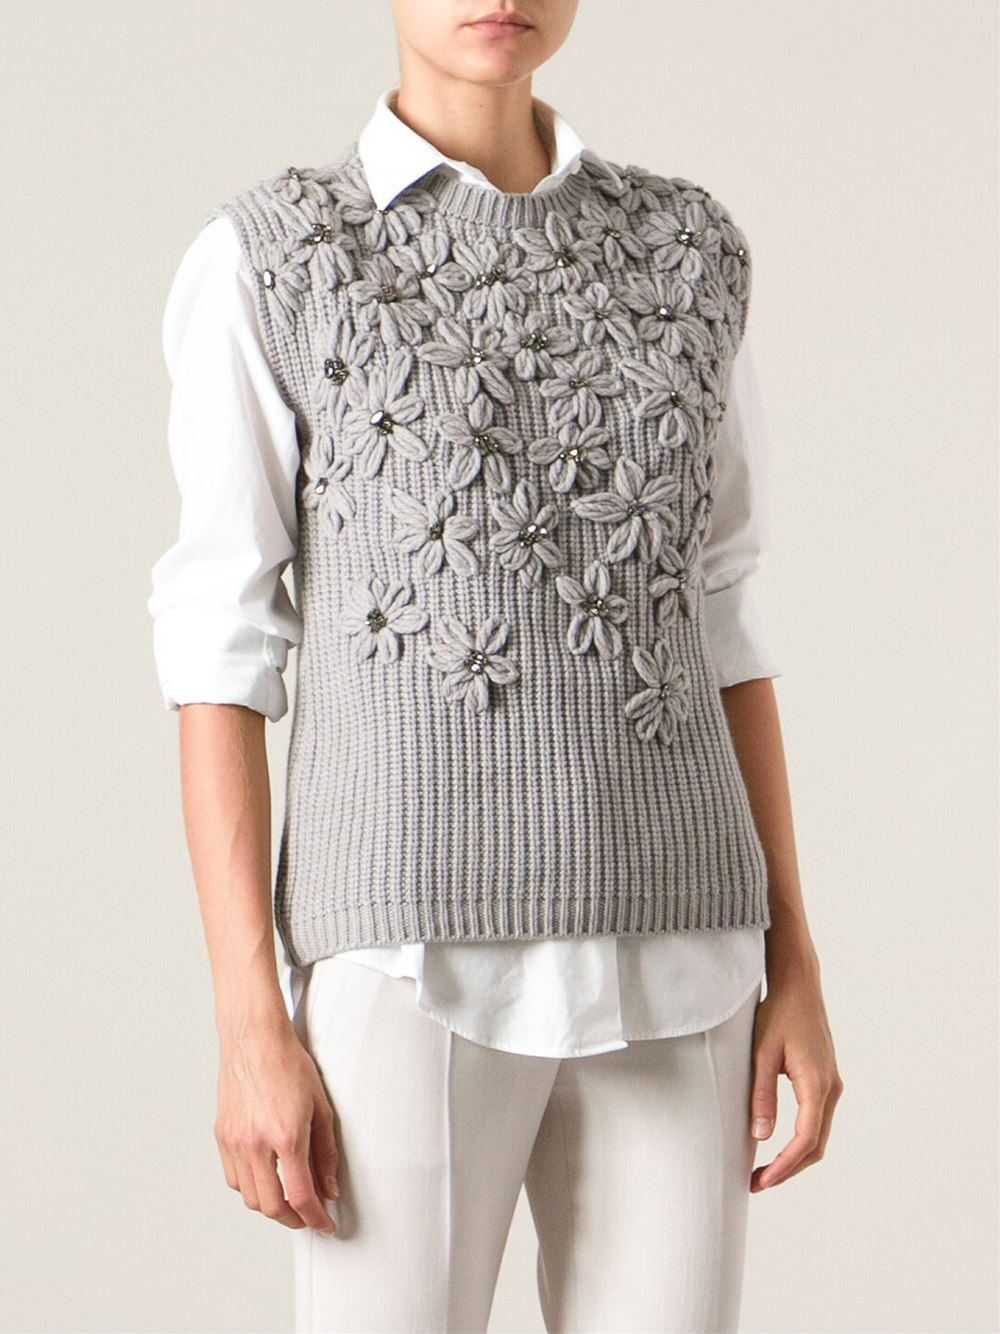 Lyst - Brunello Cucinelli Embroidered Embellished Flowers Sweater in Gray